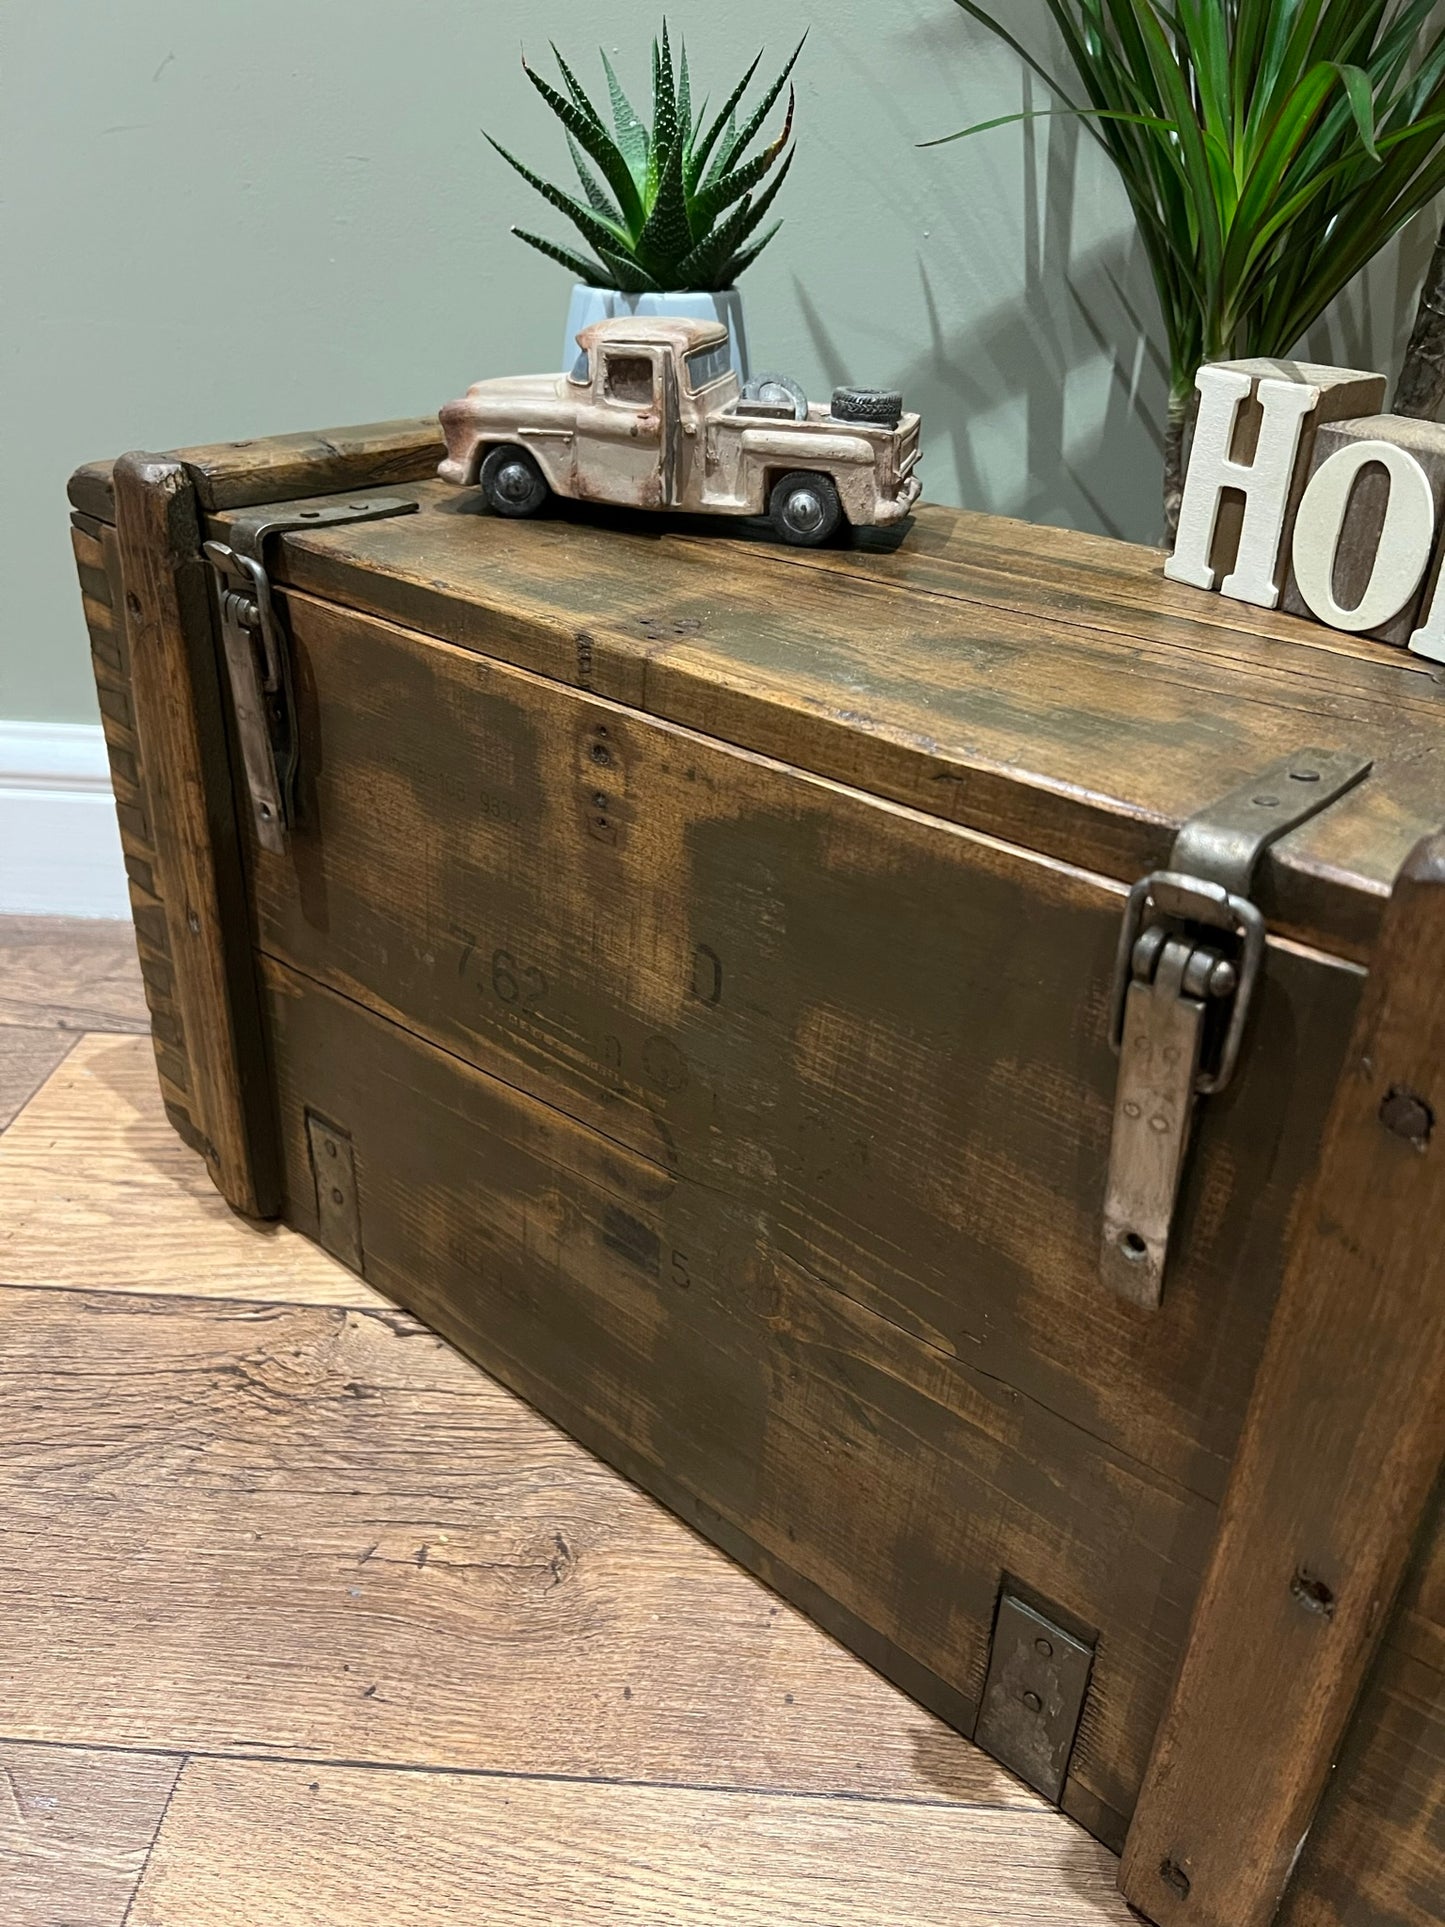 Wooden Ammo Box Vintage Rustic Storage Chest Industrial Trunk Coffee Table